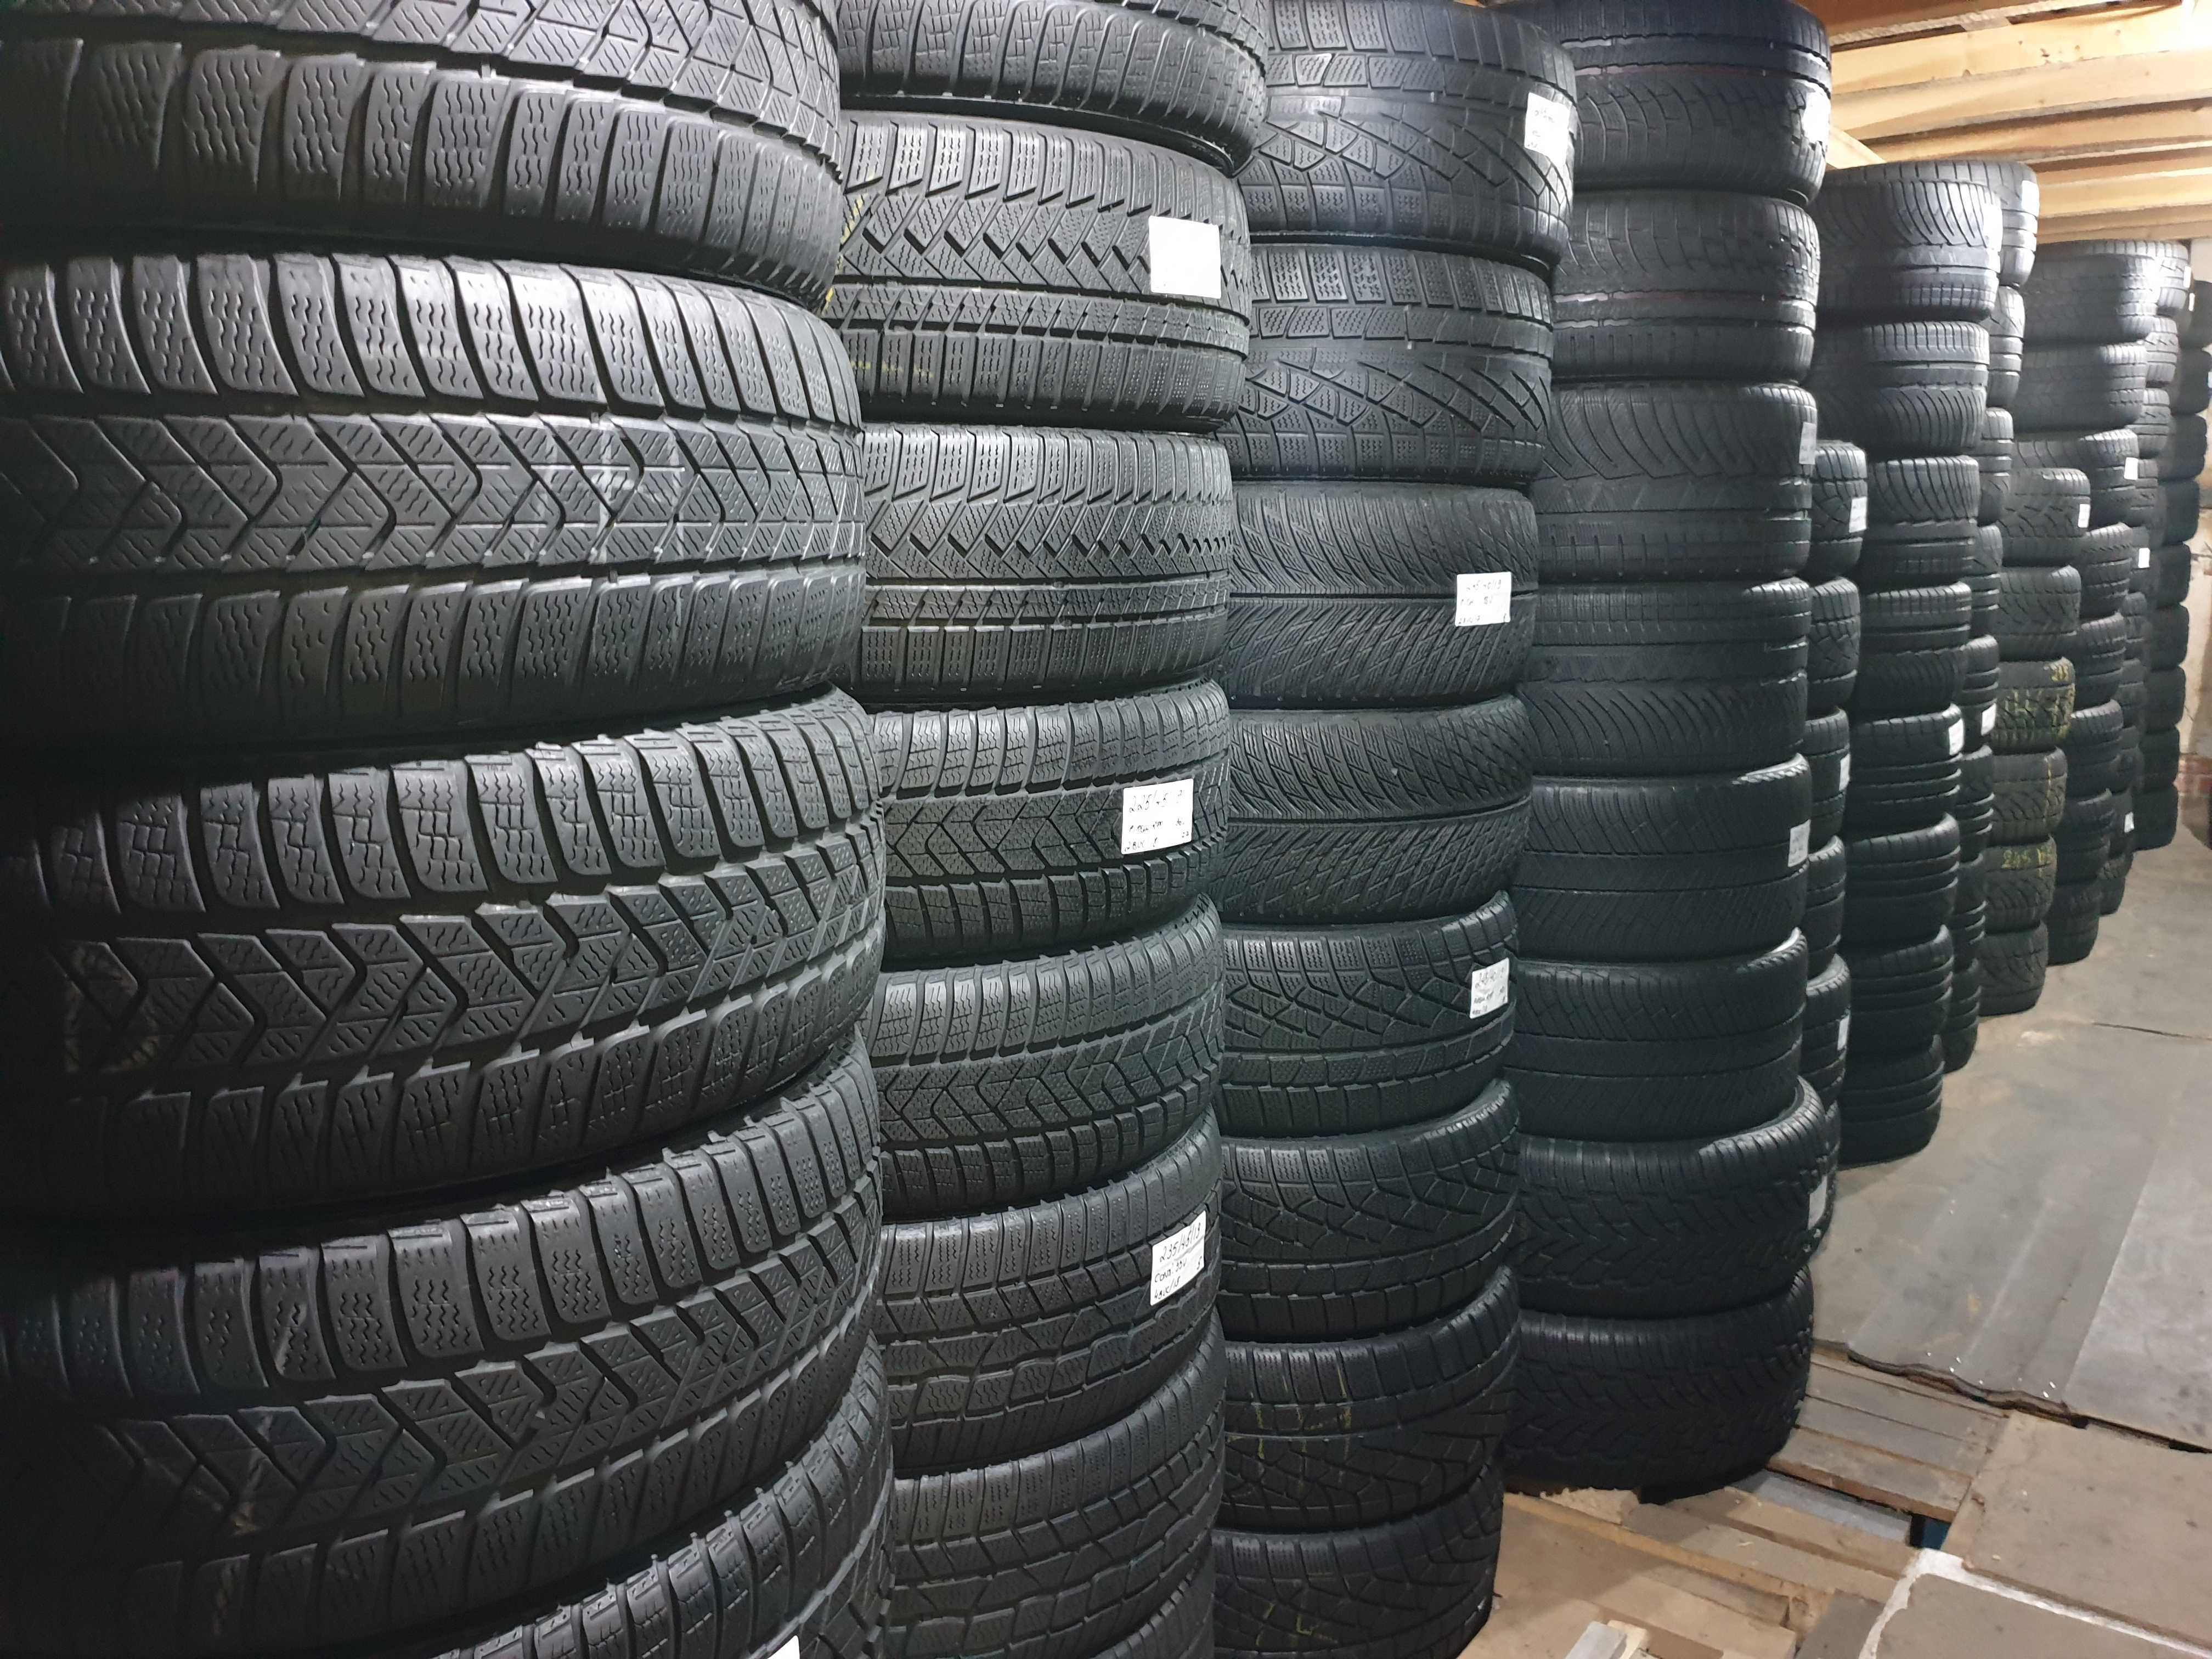 Anvelope Second Hand Iarna-265/50 R19 110H,in stoc R18/20 Bucuresti Sectorul 5 • OLX.ro